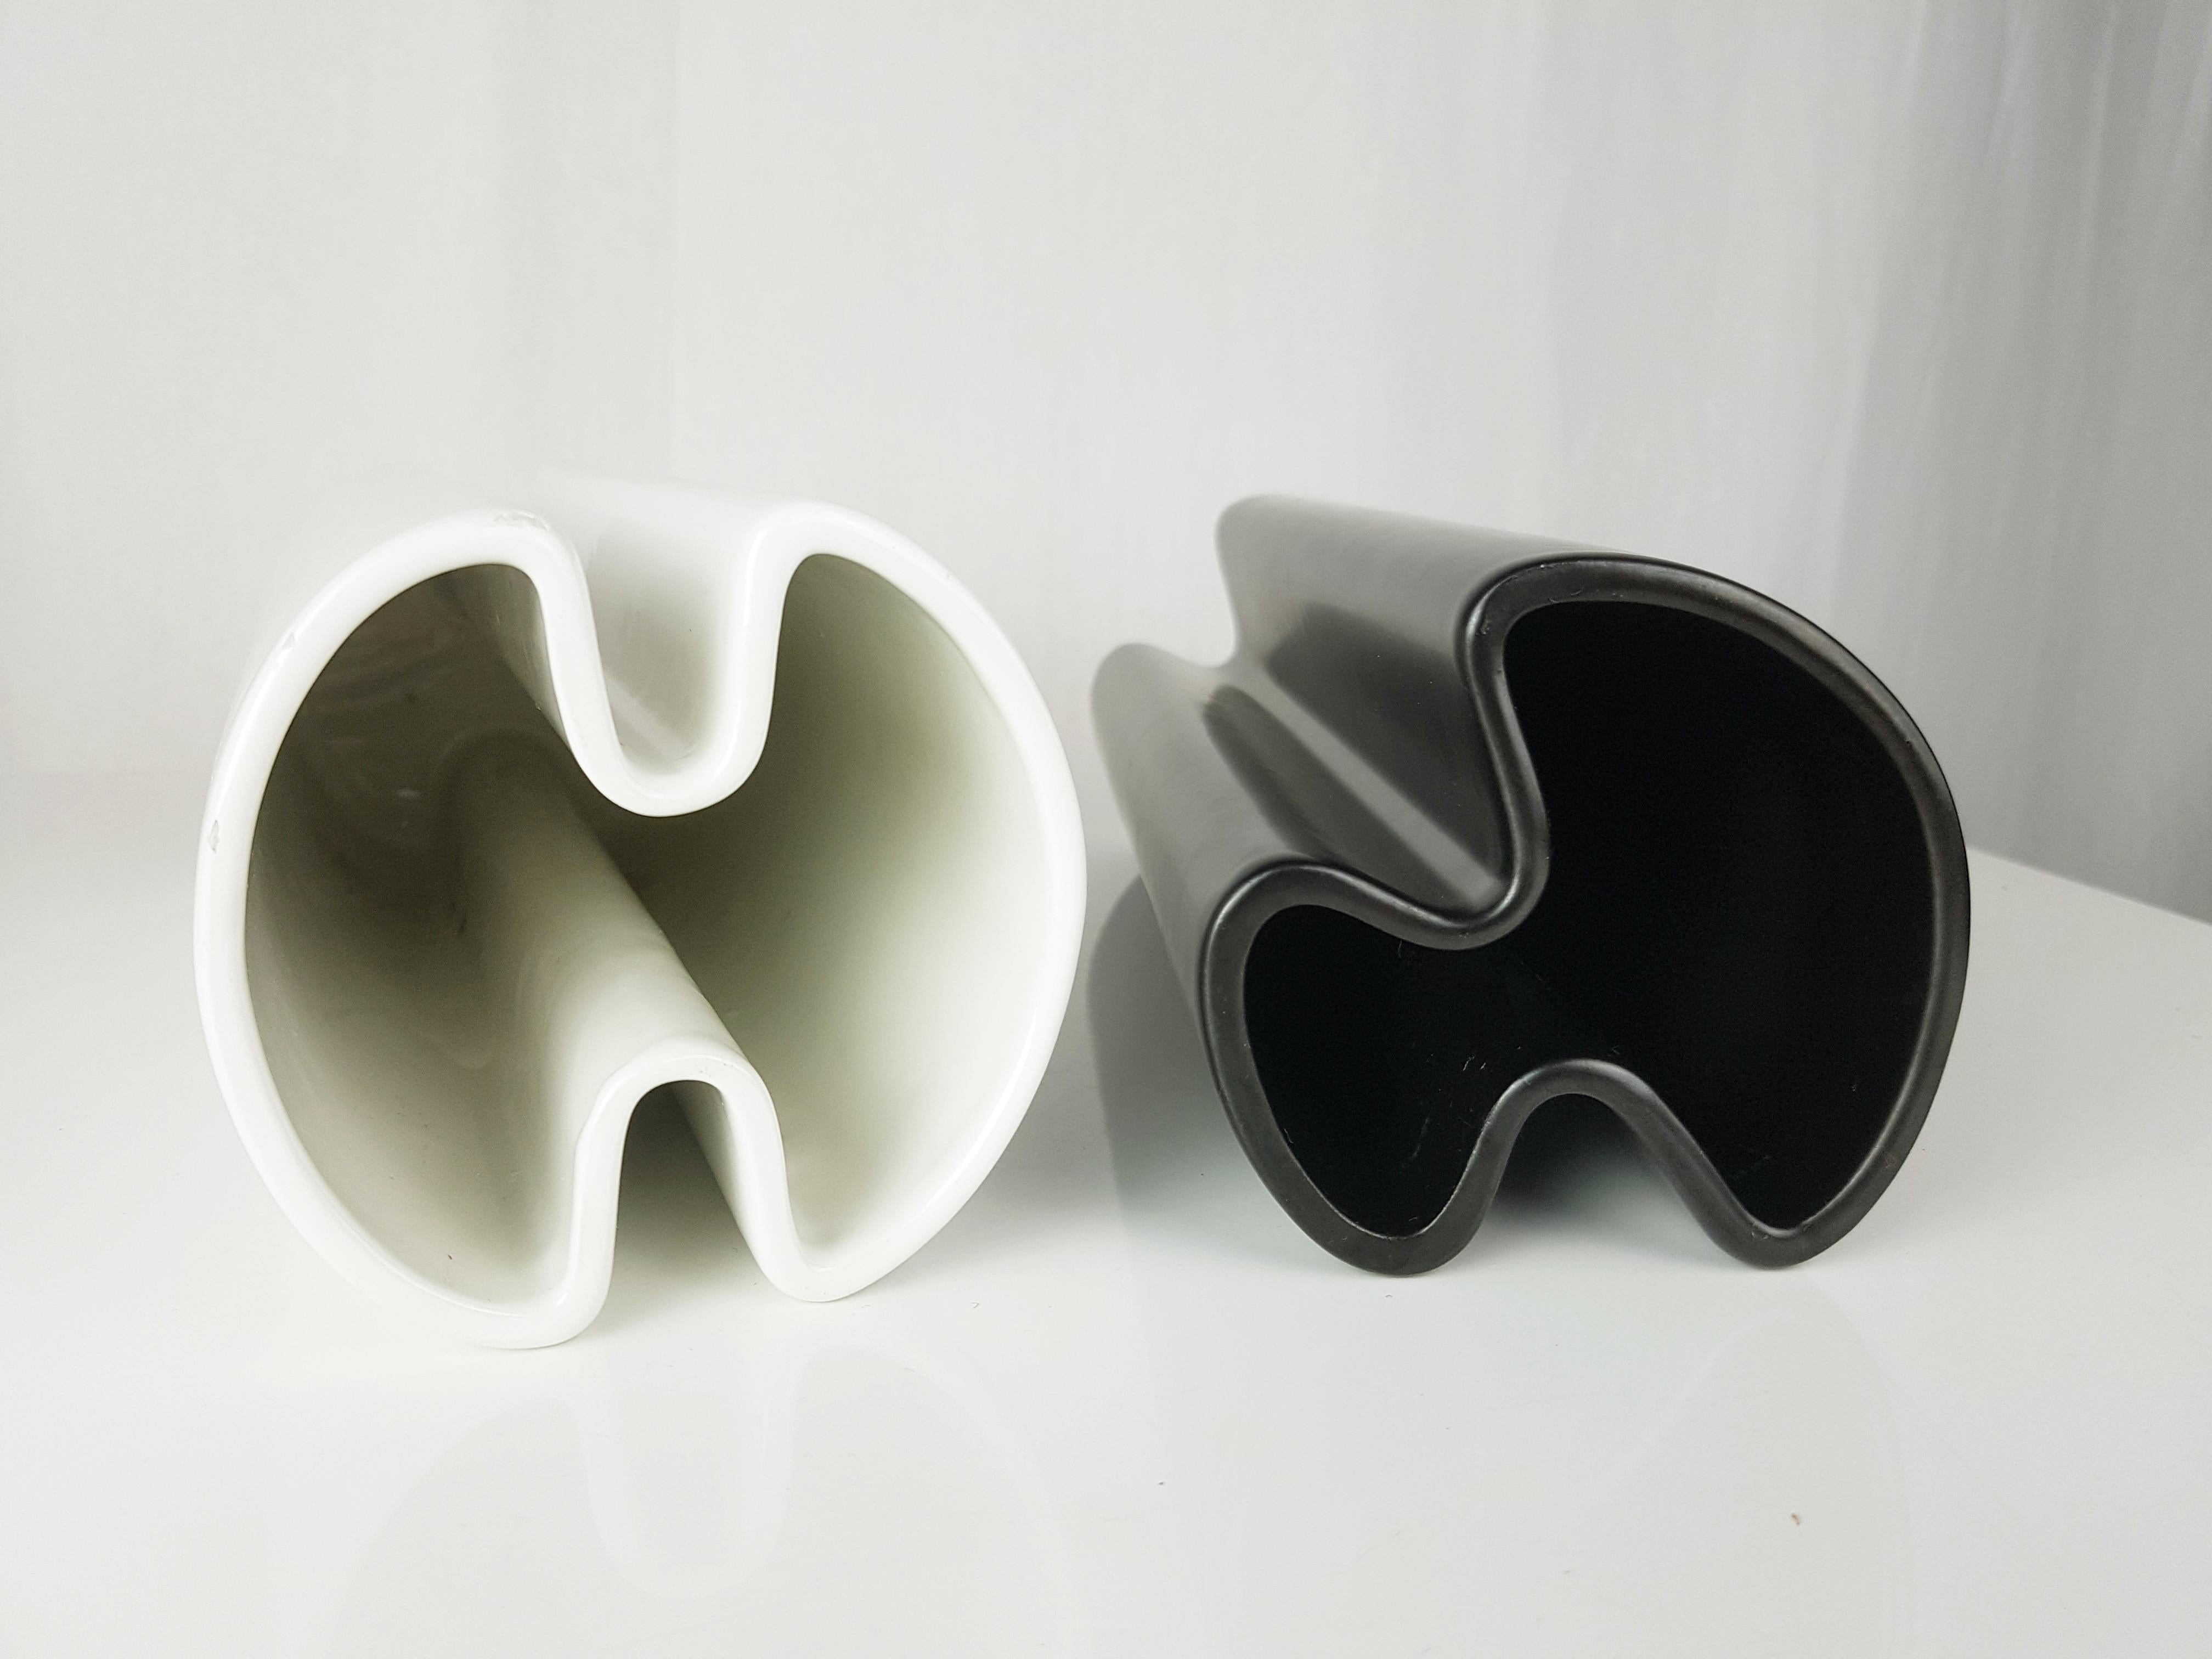 Philippines Black and White Ceramic Vases by Angelo Mangiarotti for Danese, 1964 For Sale 2